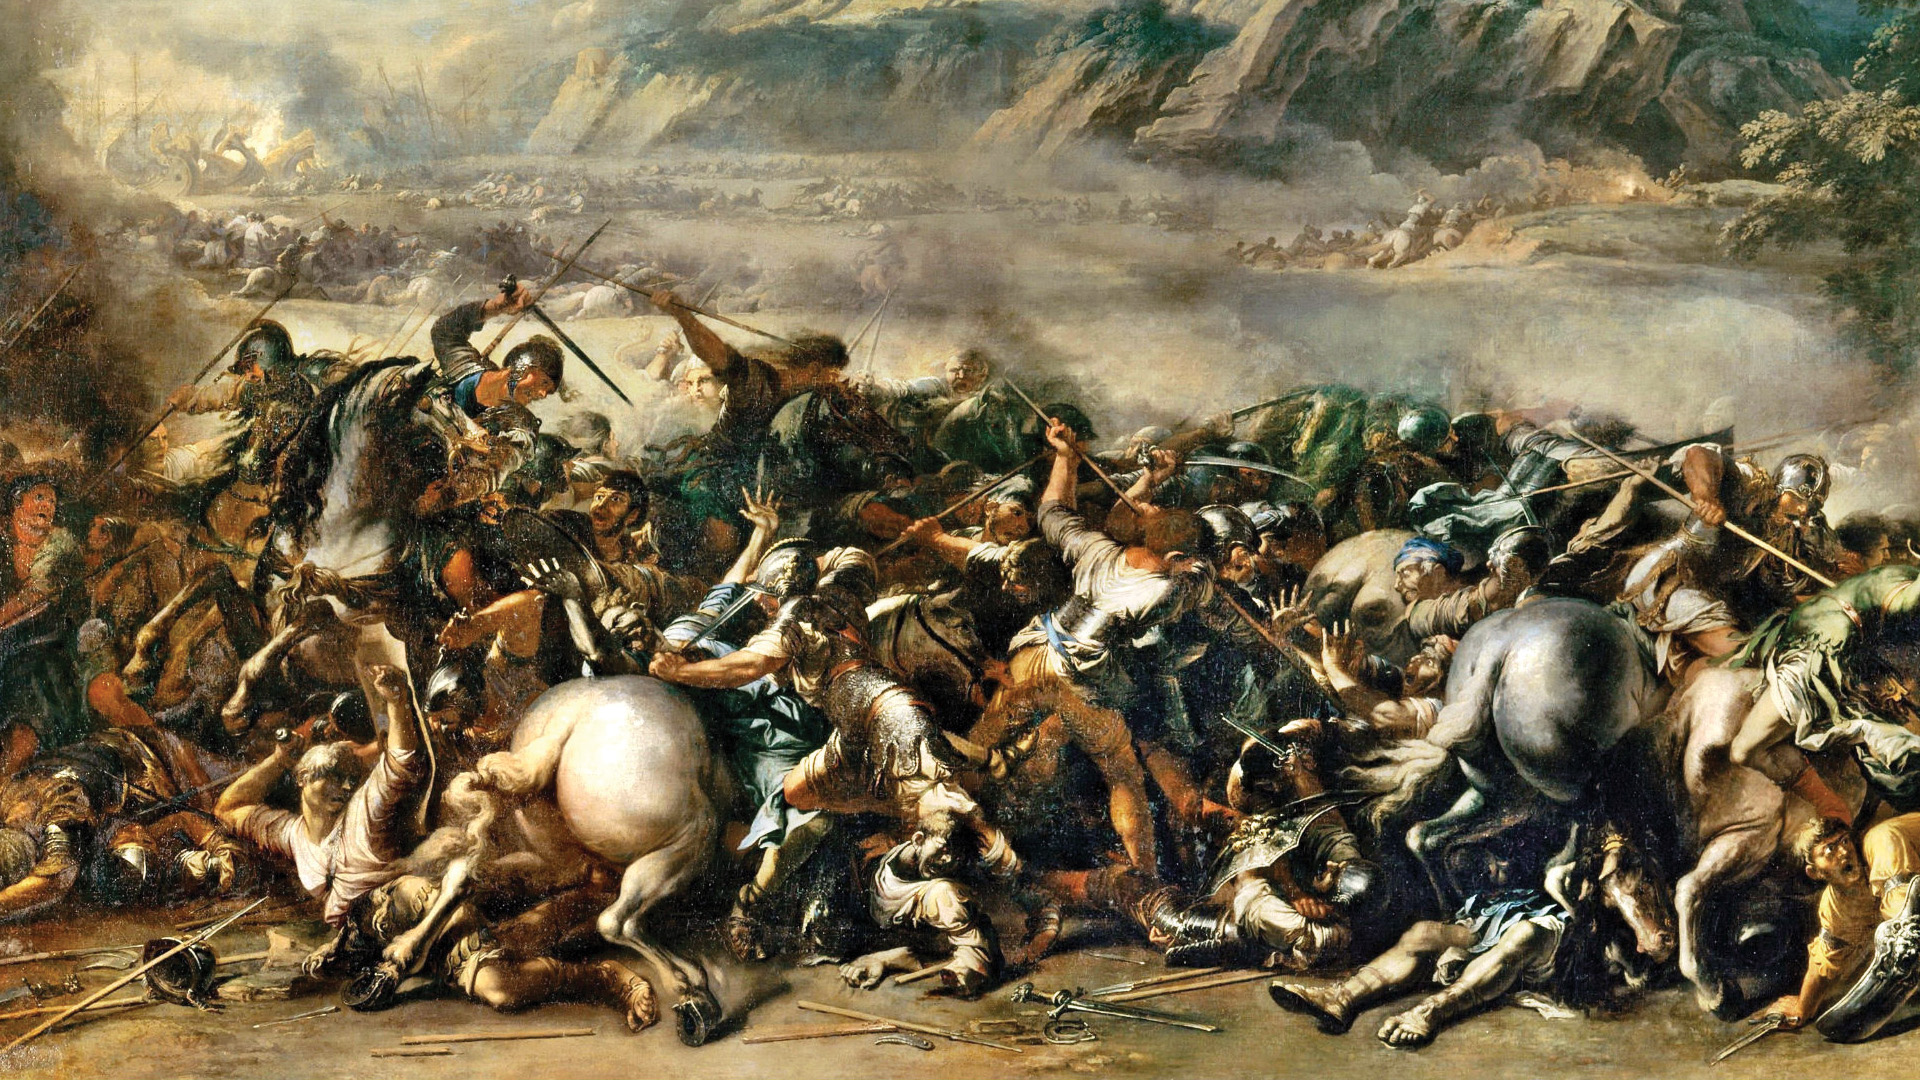 Pompey led troops to victory in a series of battles and actions that neutralized threats to Rome’s interests in Asia Minor.